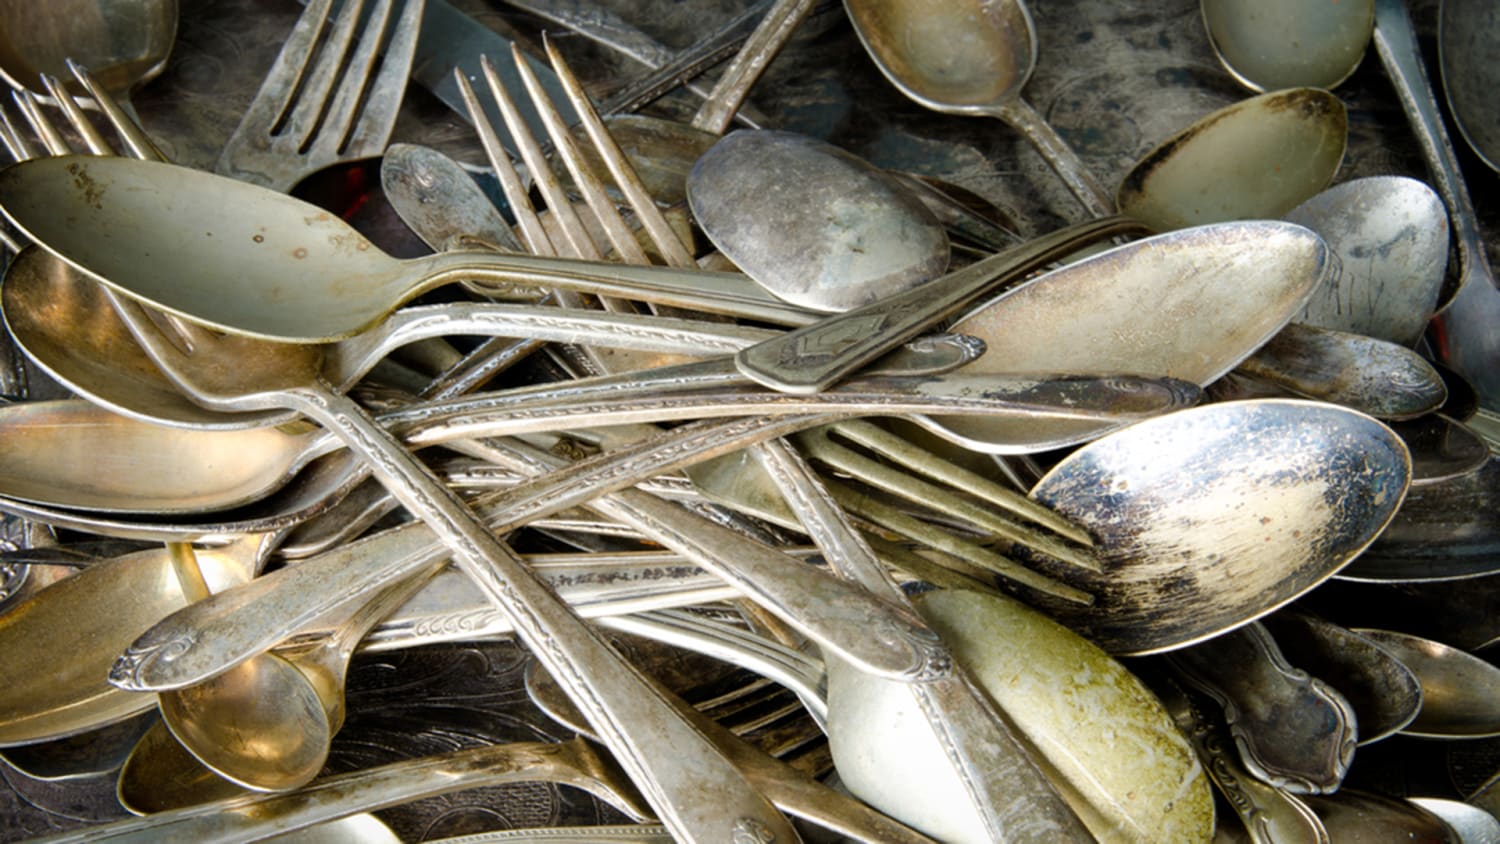 tarnished silverware stock today tease 160622 - Cleaning Your Silverware With Polish Or Homemade Remedies